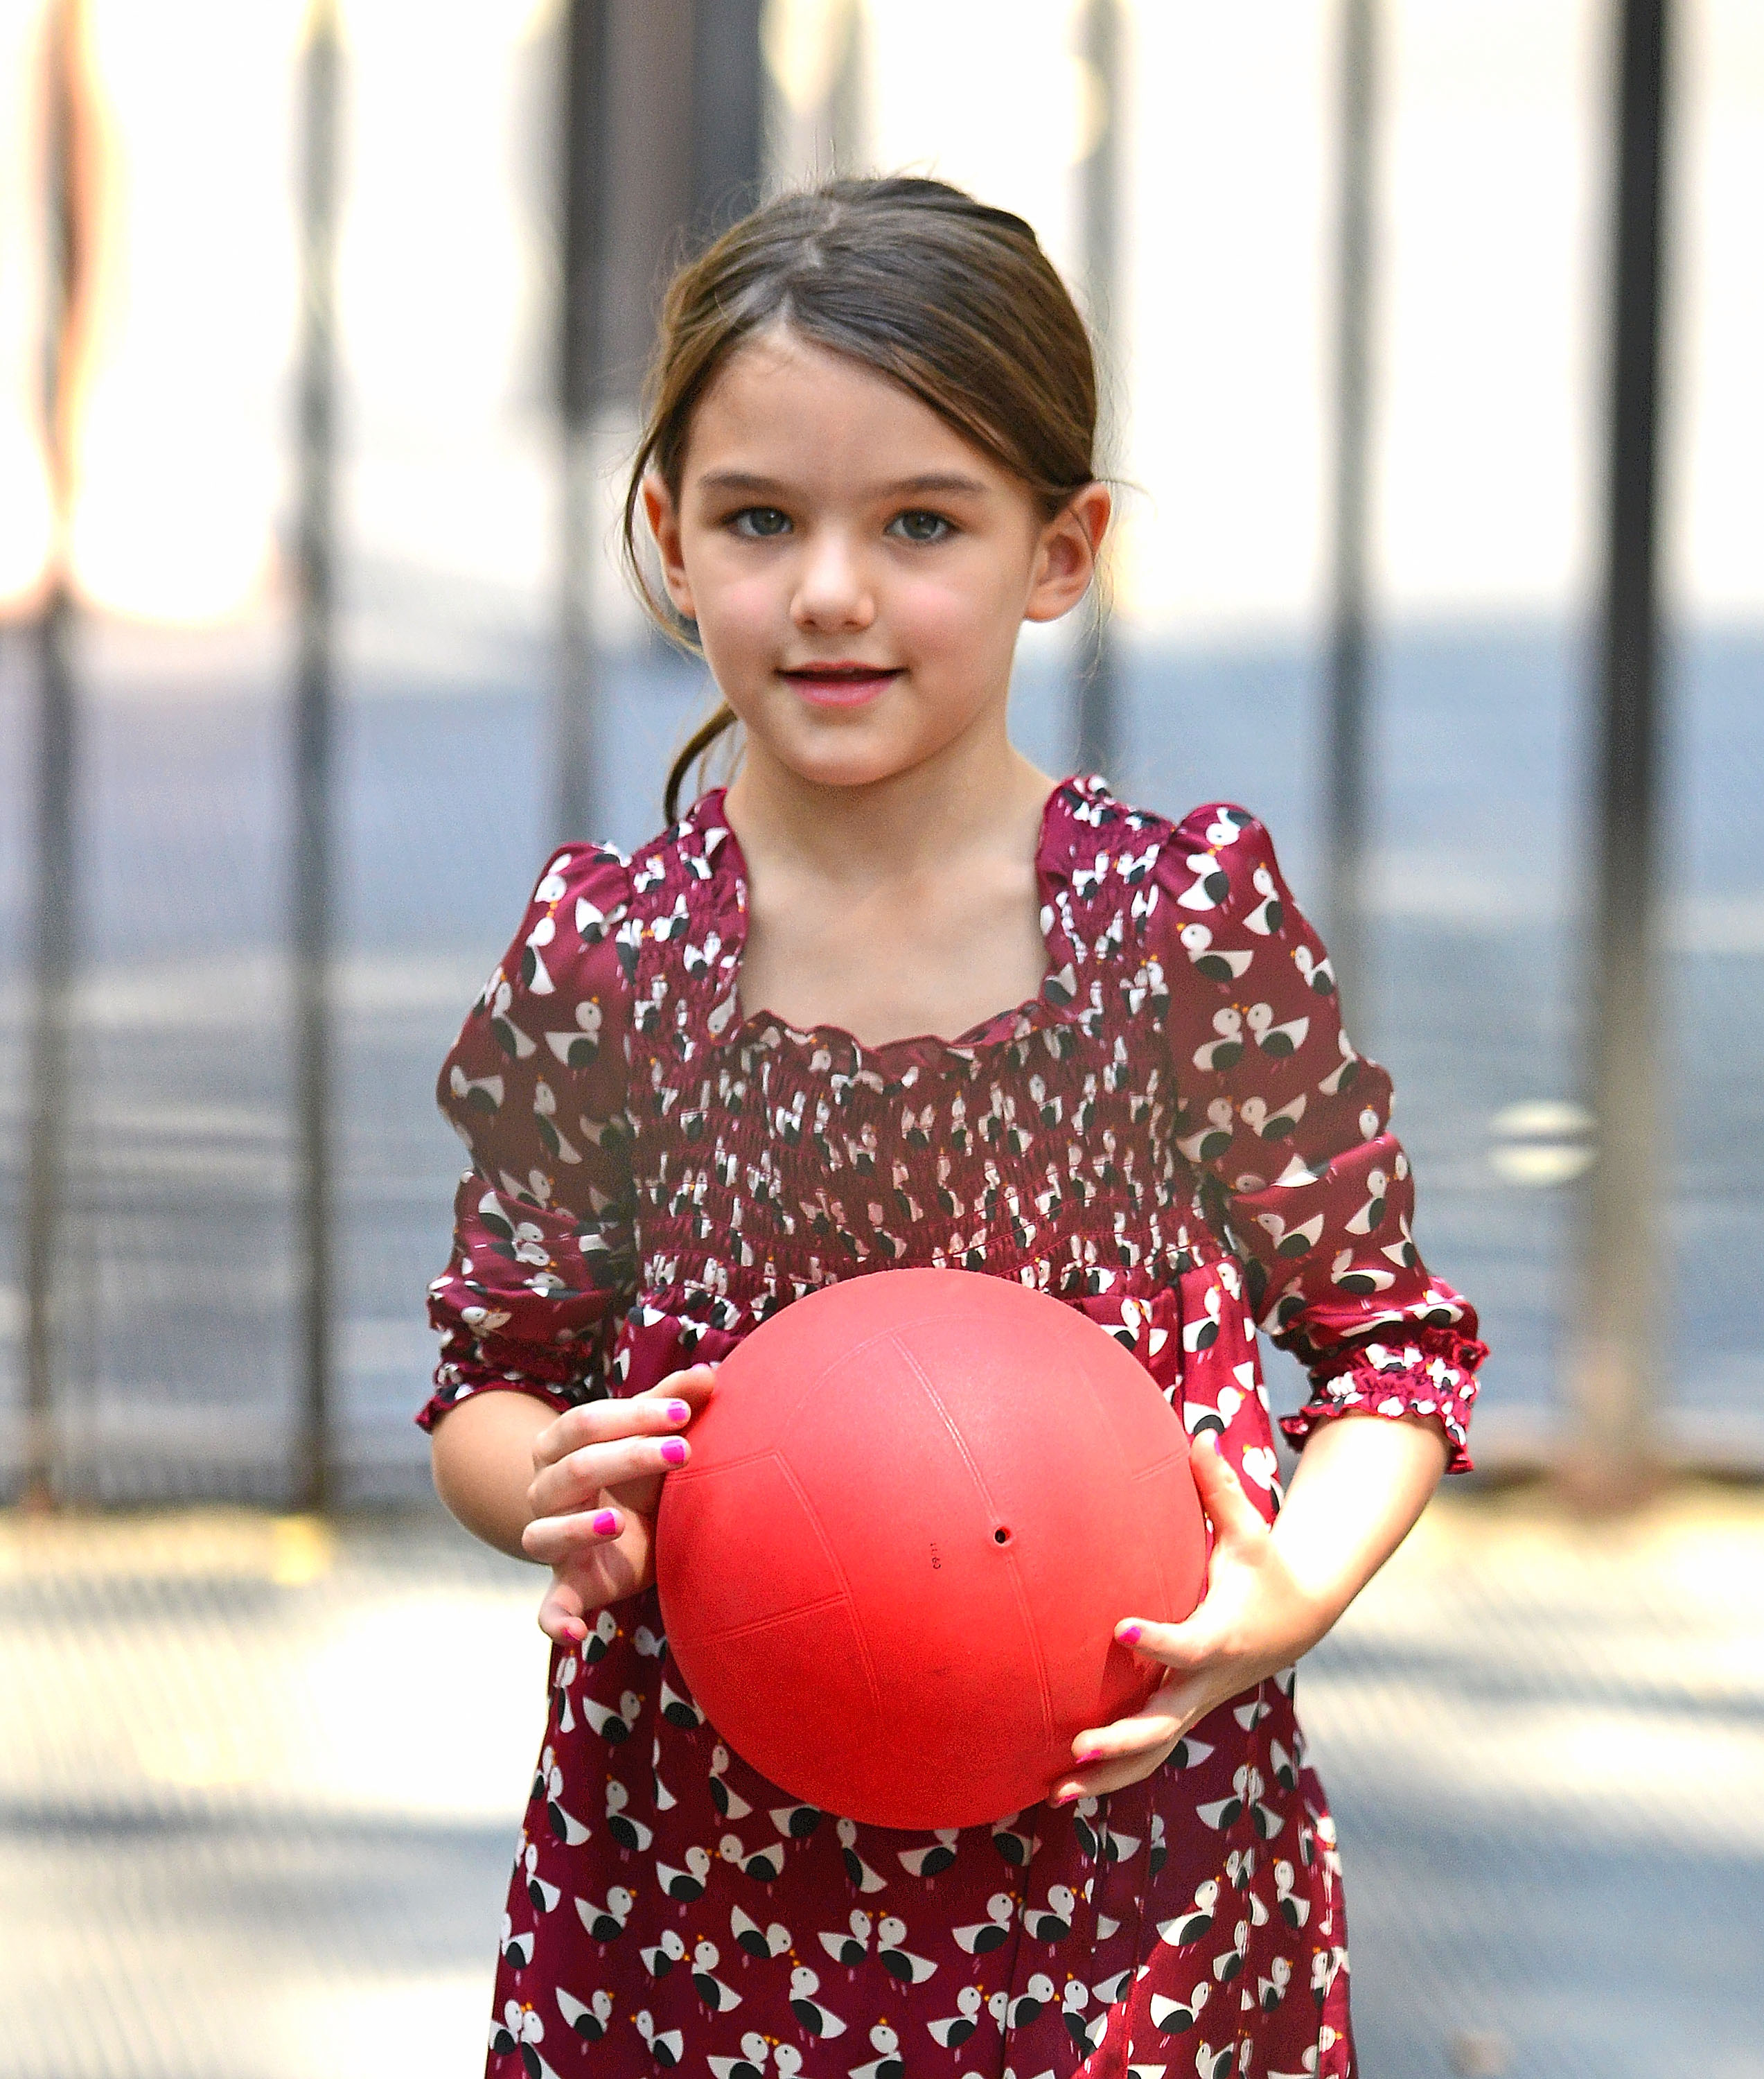 Suri Cruise plays in Bleecker Playground on August 25, 2012 in New York City. | Source: Getty Images